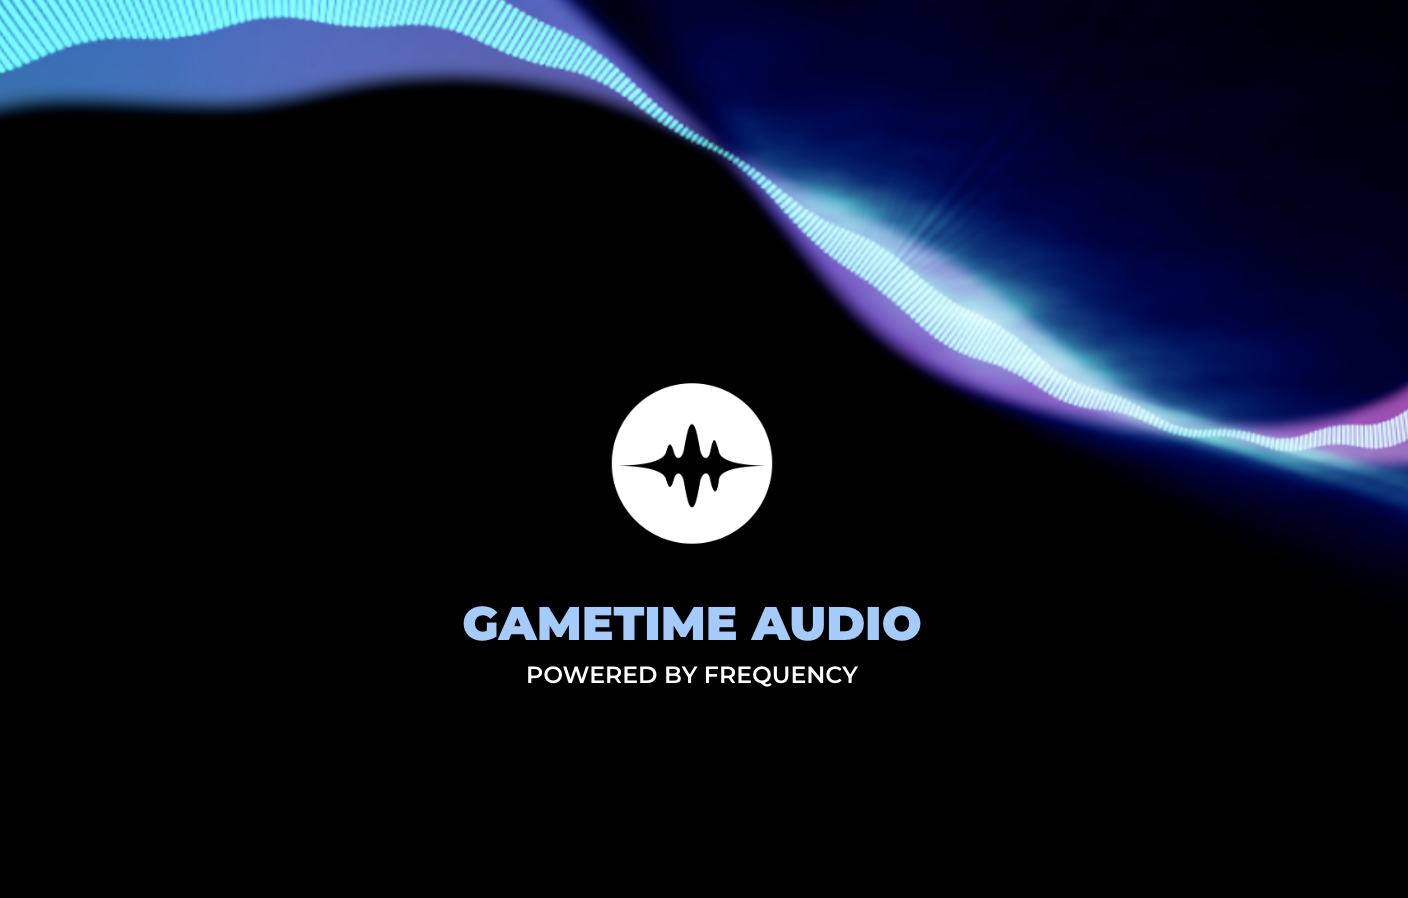 Connect with fans in real-time with Frequency’s Gametime Audio 